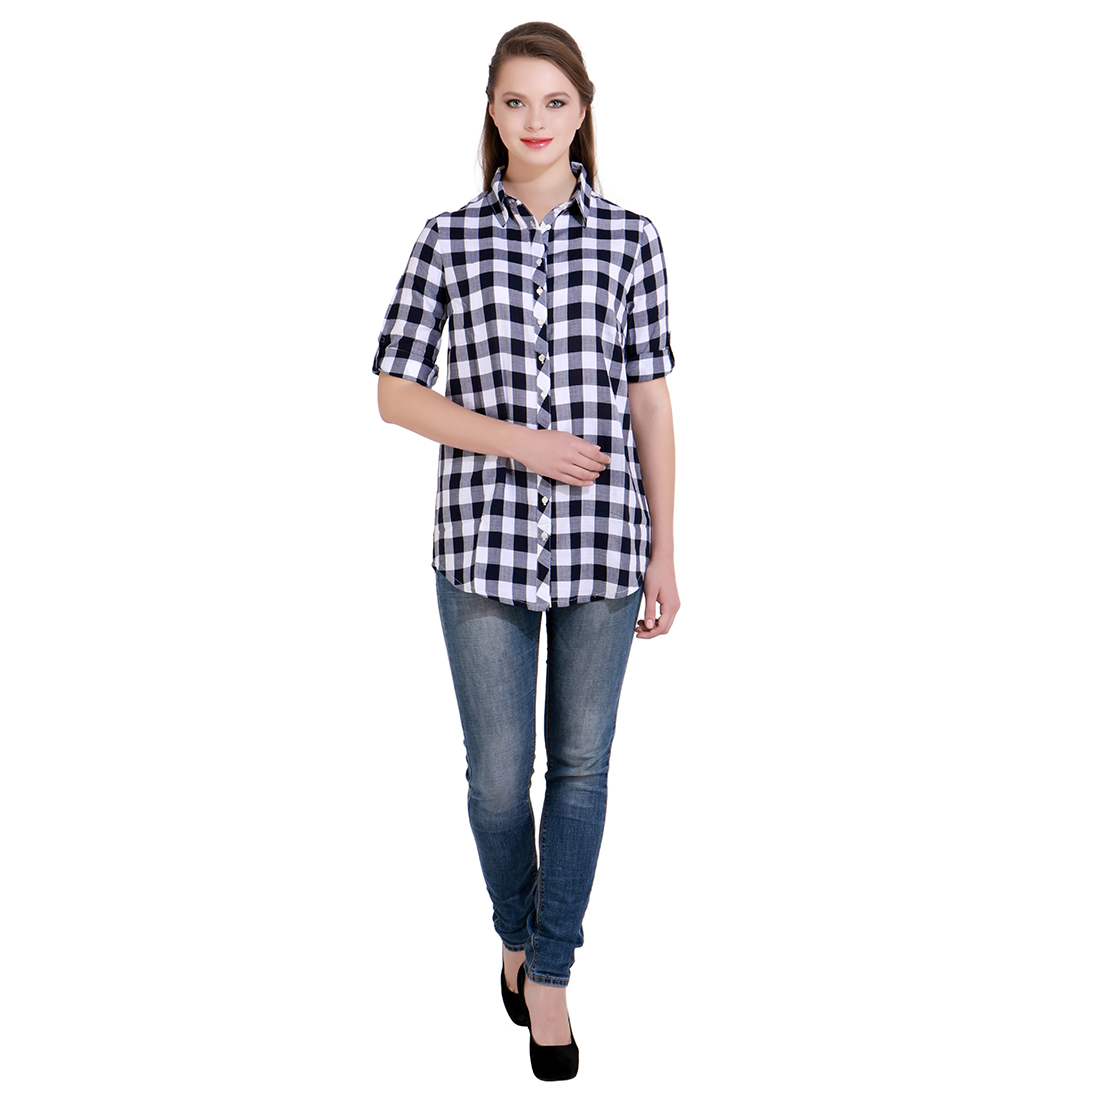 Buy cotton check long shirt Online @ ₹599 from ShopClues